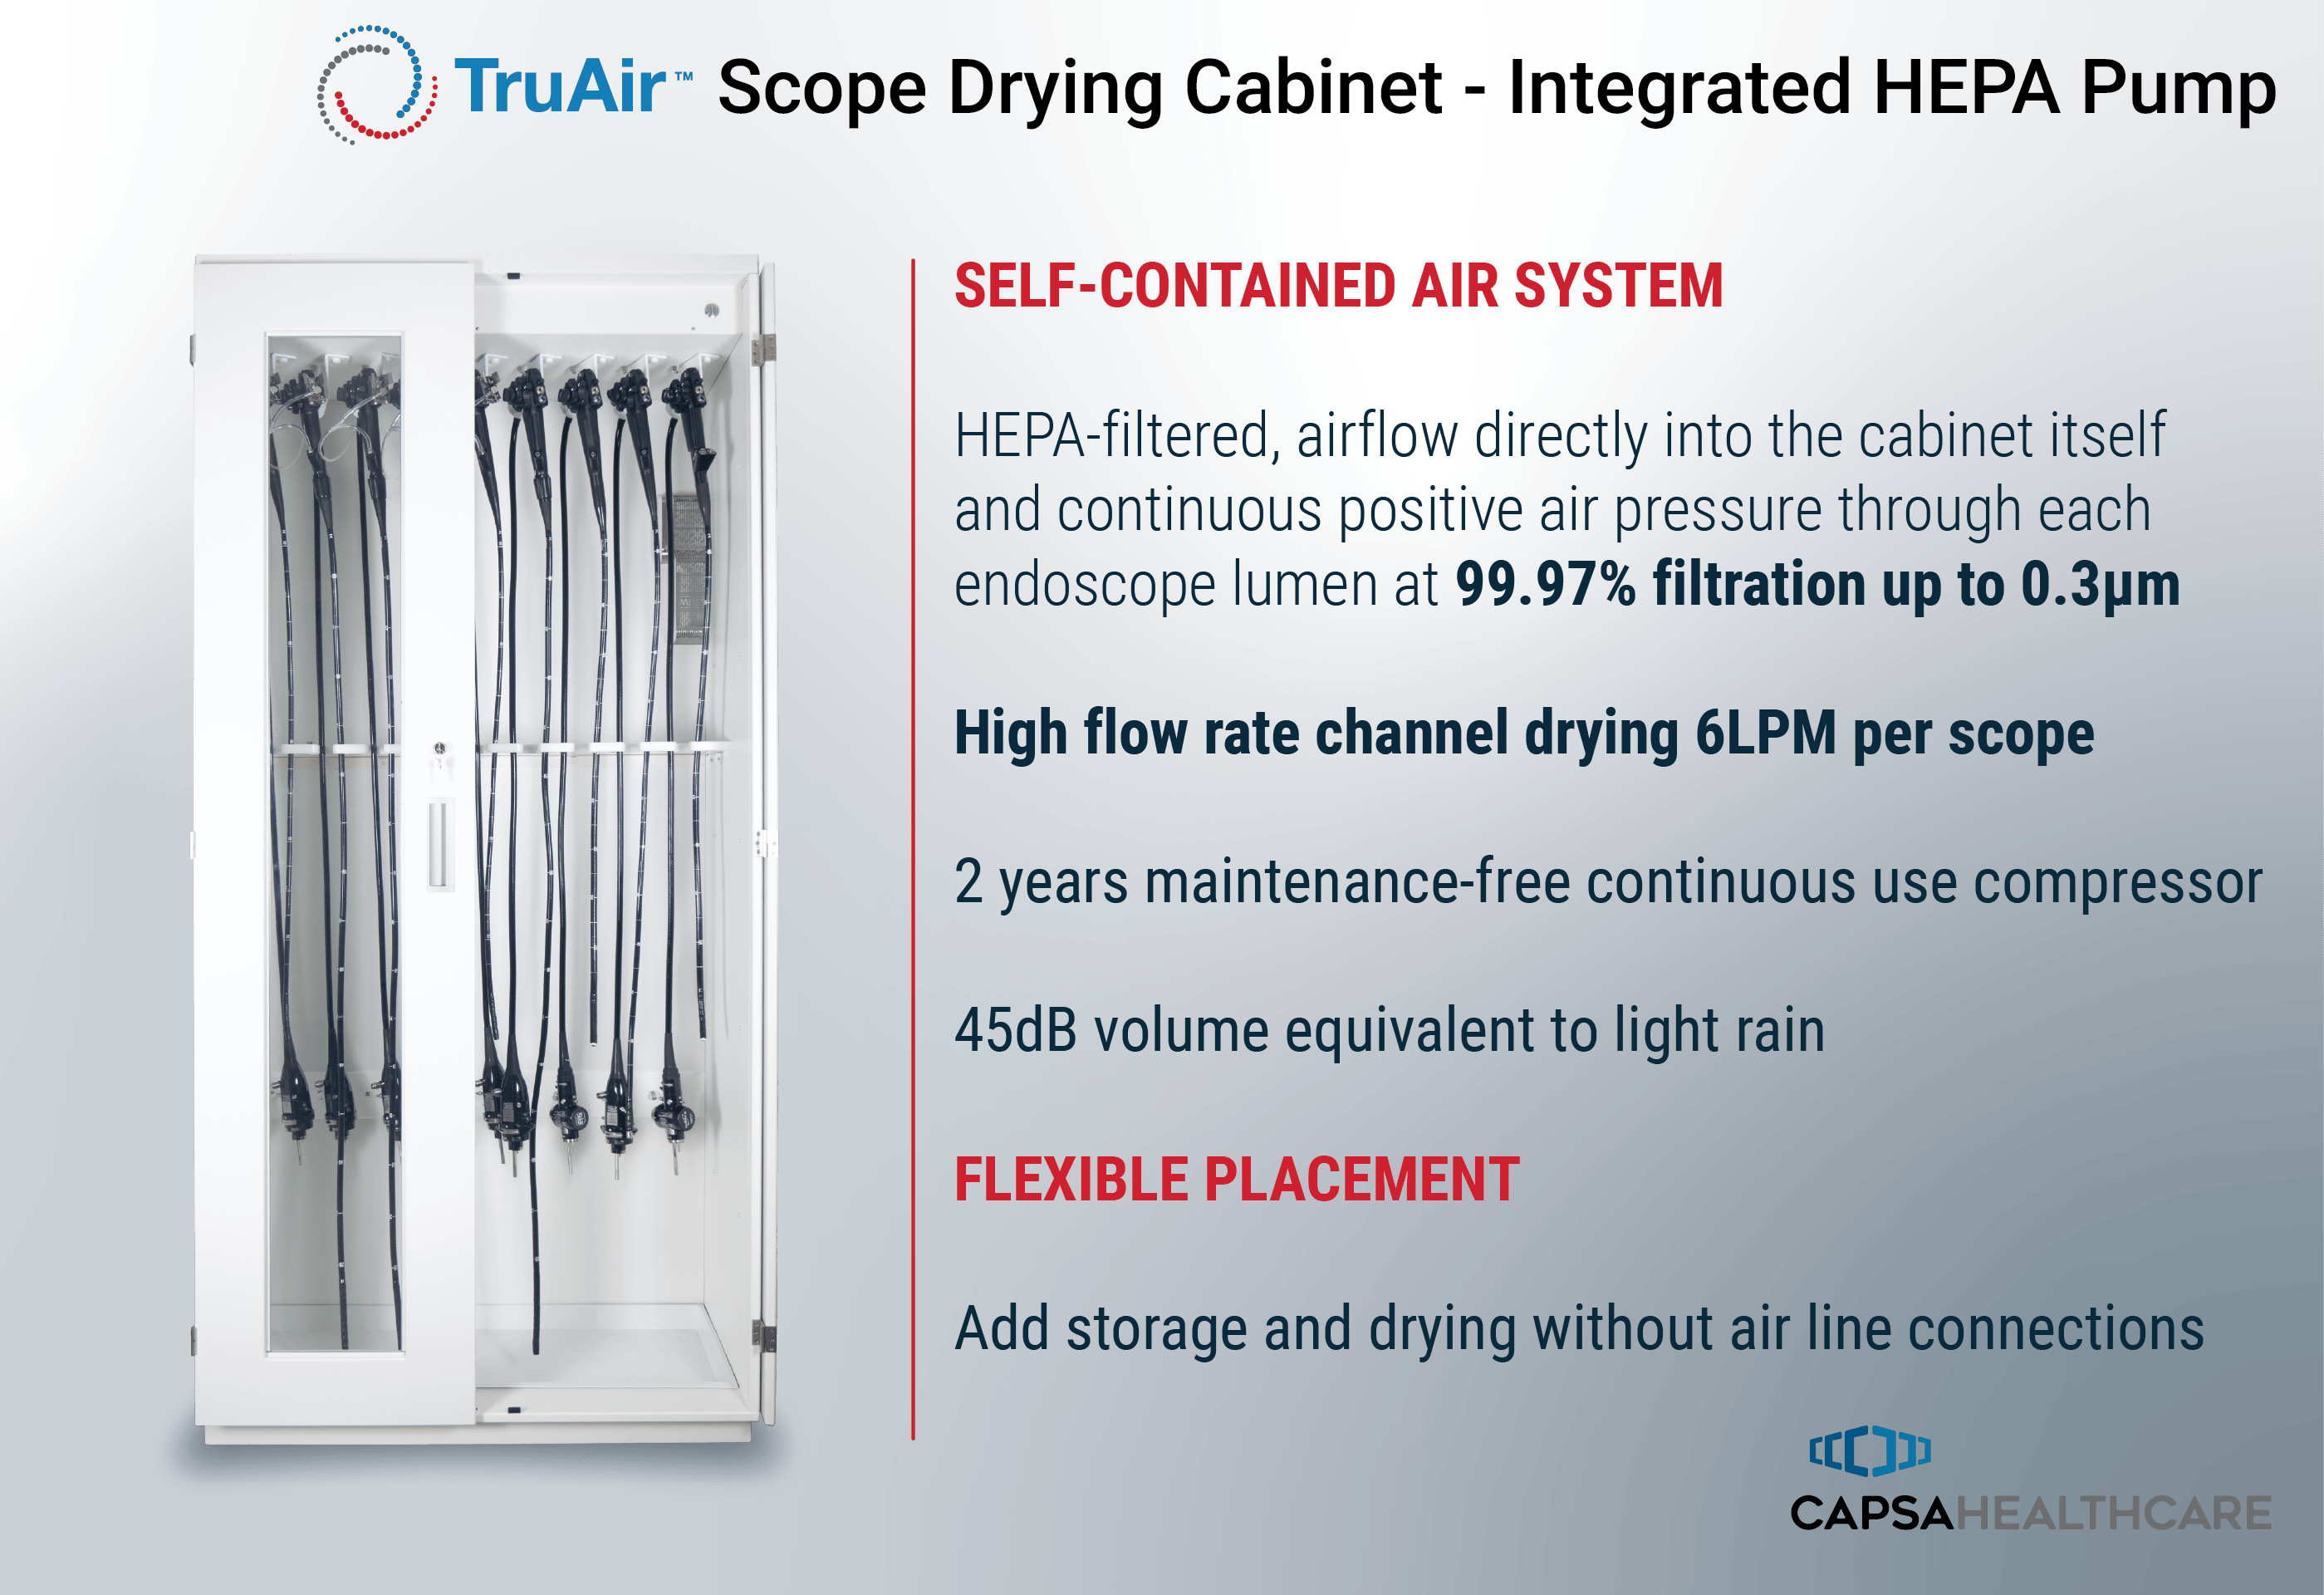 TruAir Scope Drying Cabinet - Integrated Air Overview